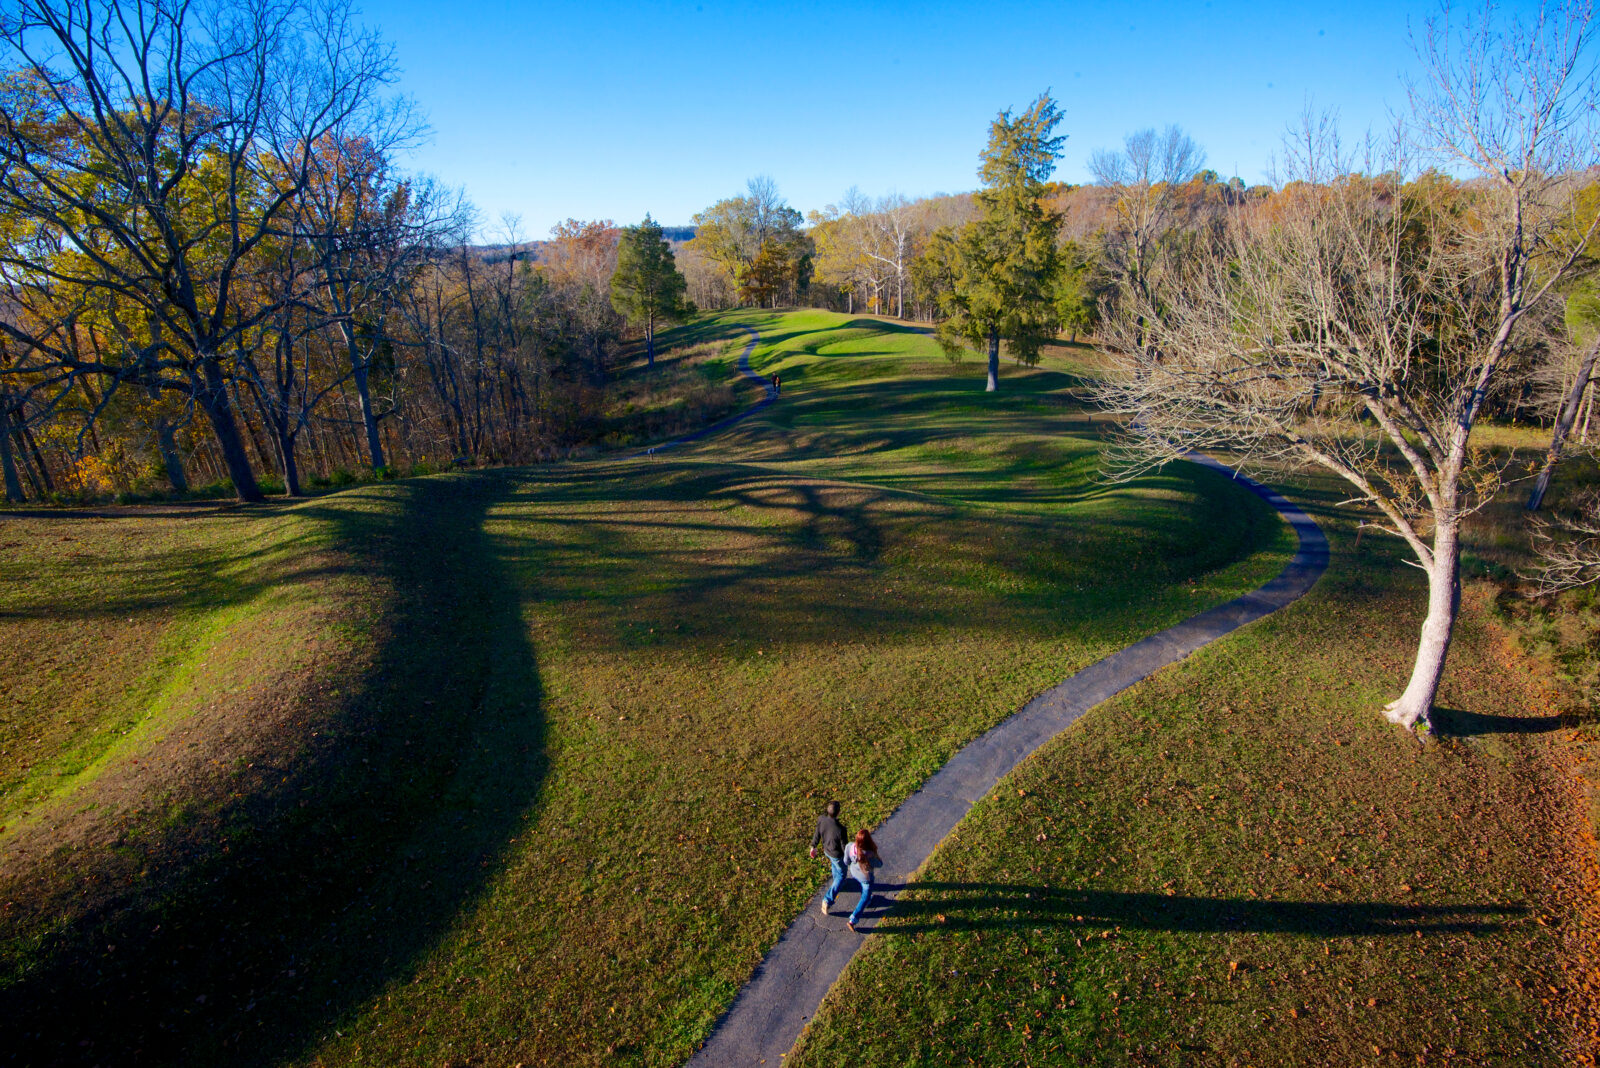 The Great Serpent Mound is a 1,348-foot long, three-foot-high prehistoric effigy mound on a plateau of the Serpent Mound crater along Ohio Brush Creek in Adams County, Ohio. Photograph by Danita Delimont